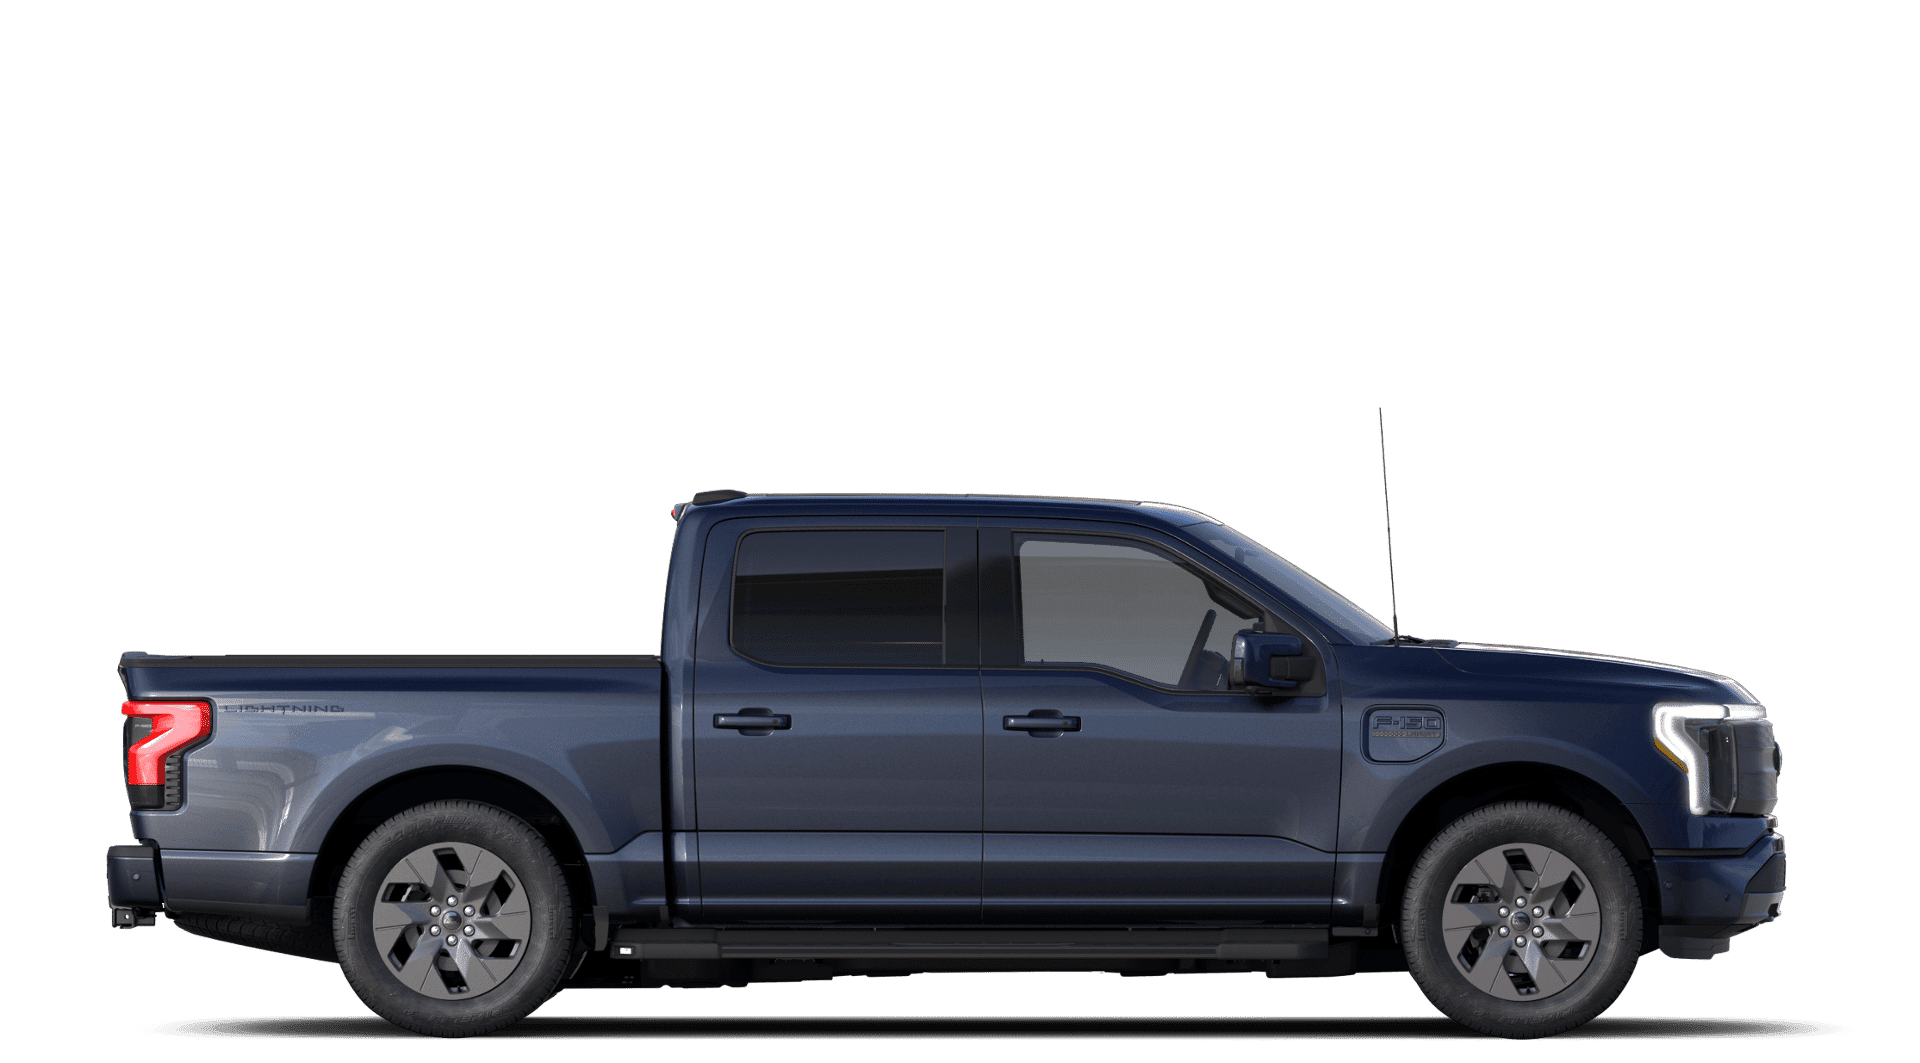 Ford F-150 Lightning Eibach R&D for Lightning lowering kit, leveling kit and lift kit -- submit your input MyLightni